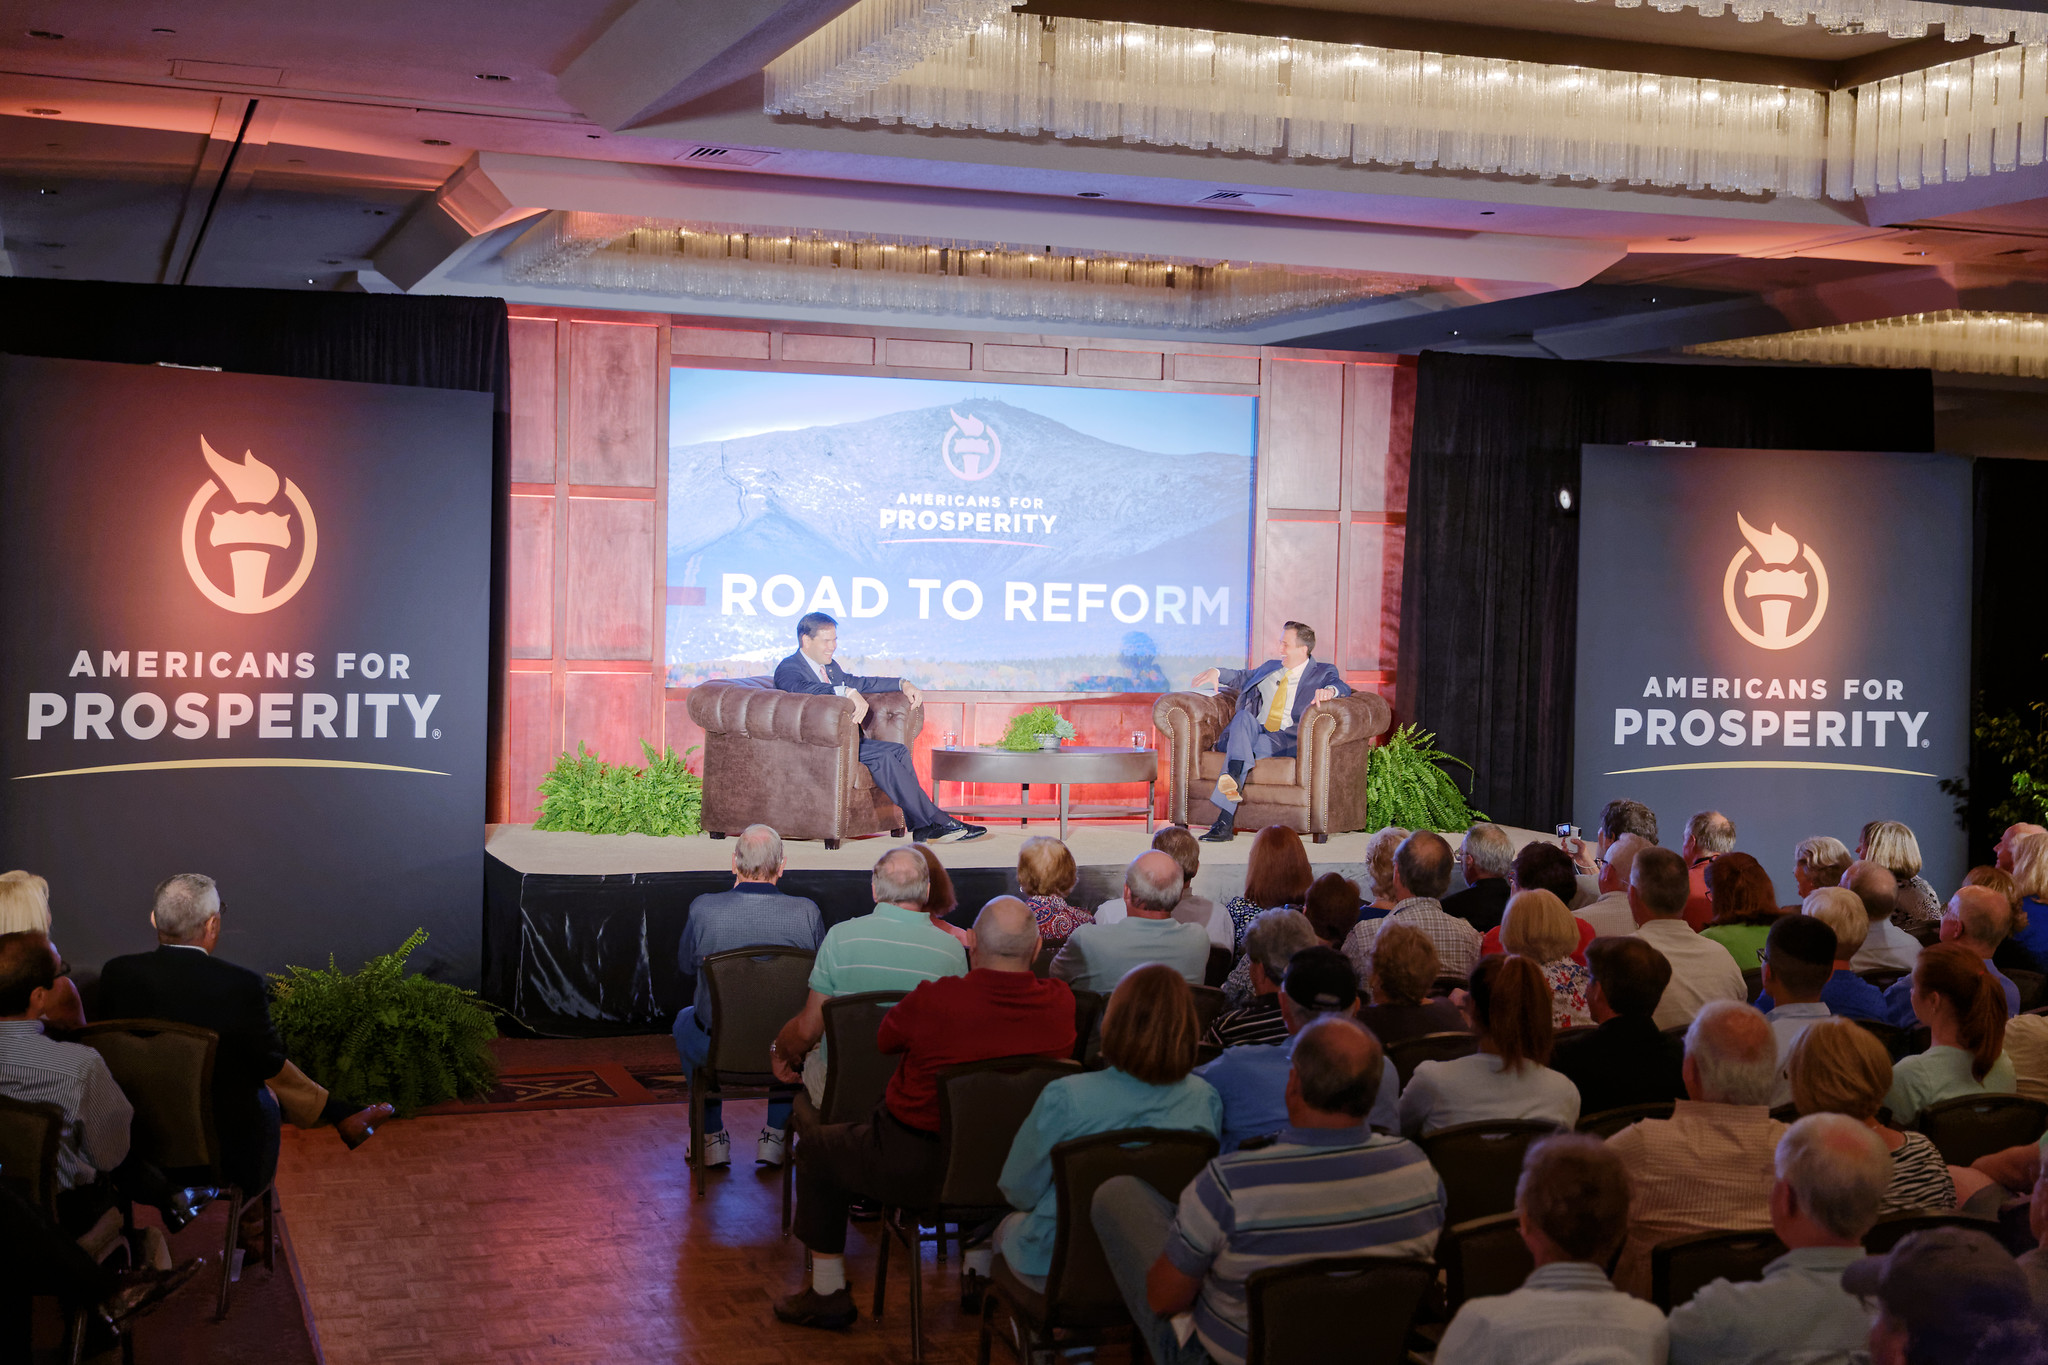 Marco Rubio speaking at Americans for Prosperity event in 2015